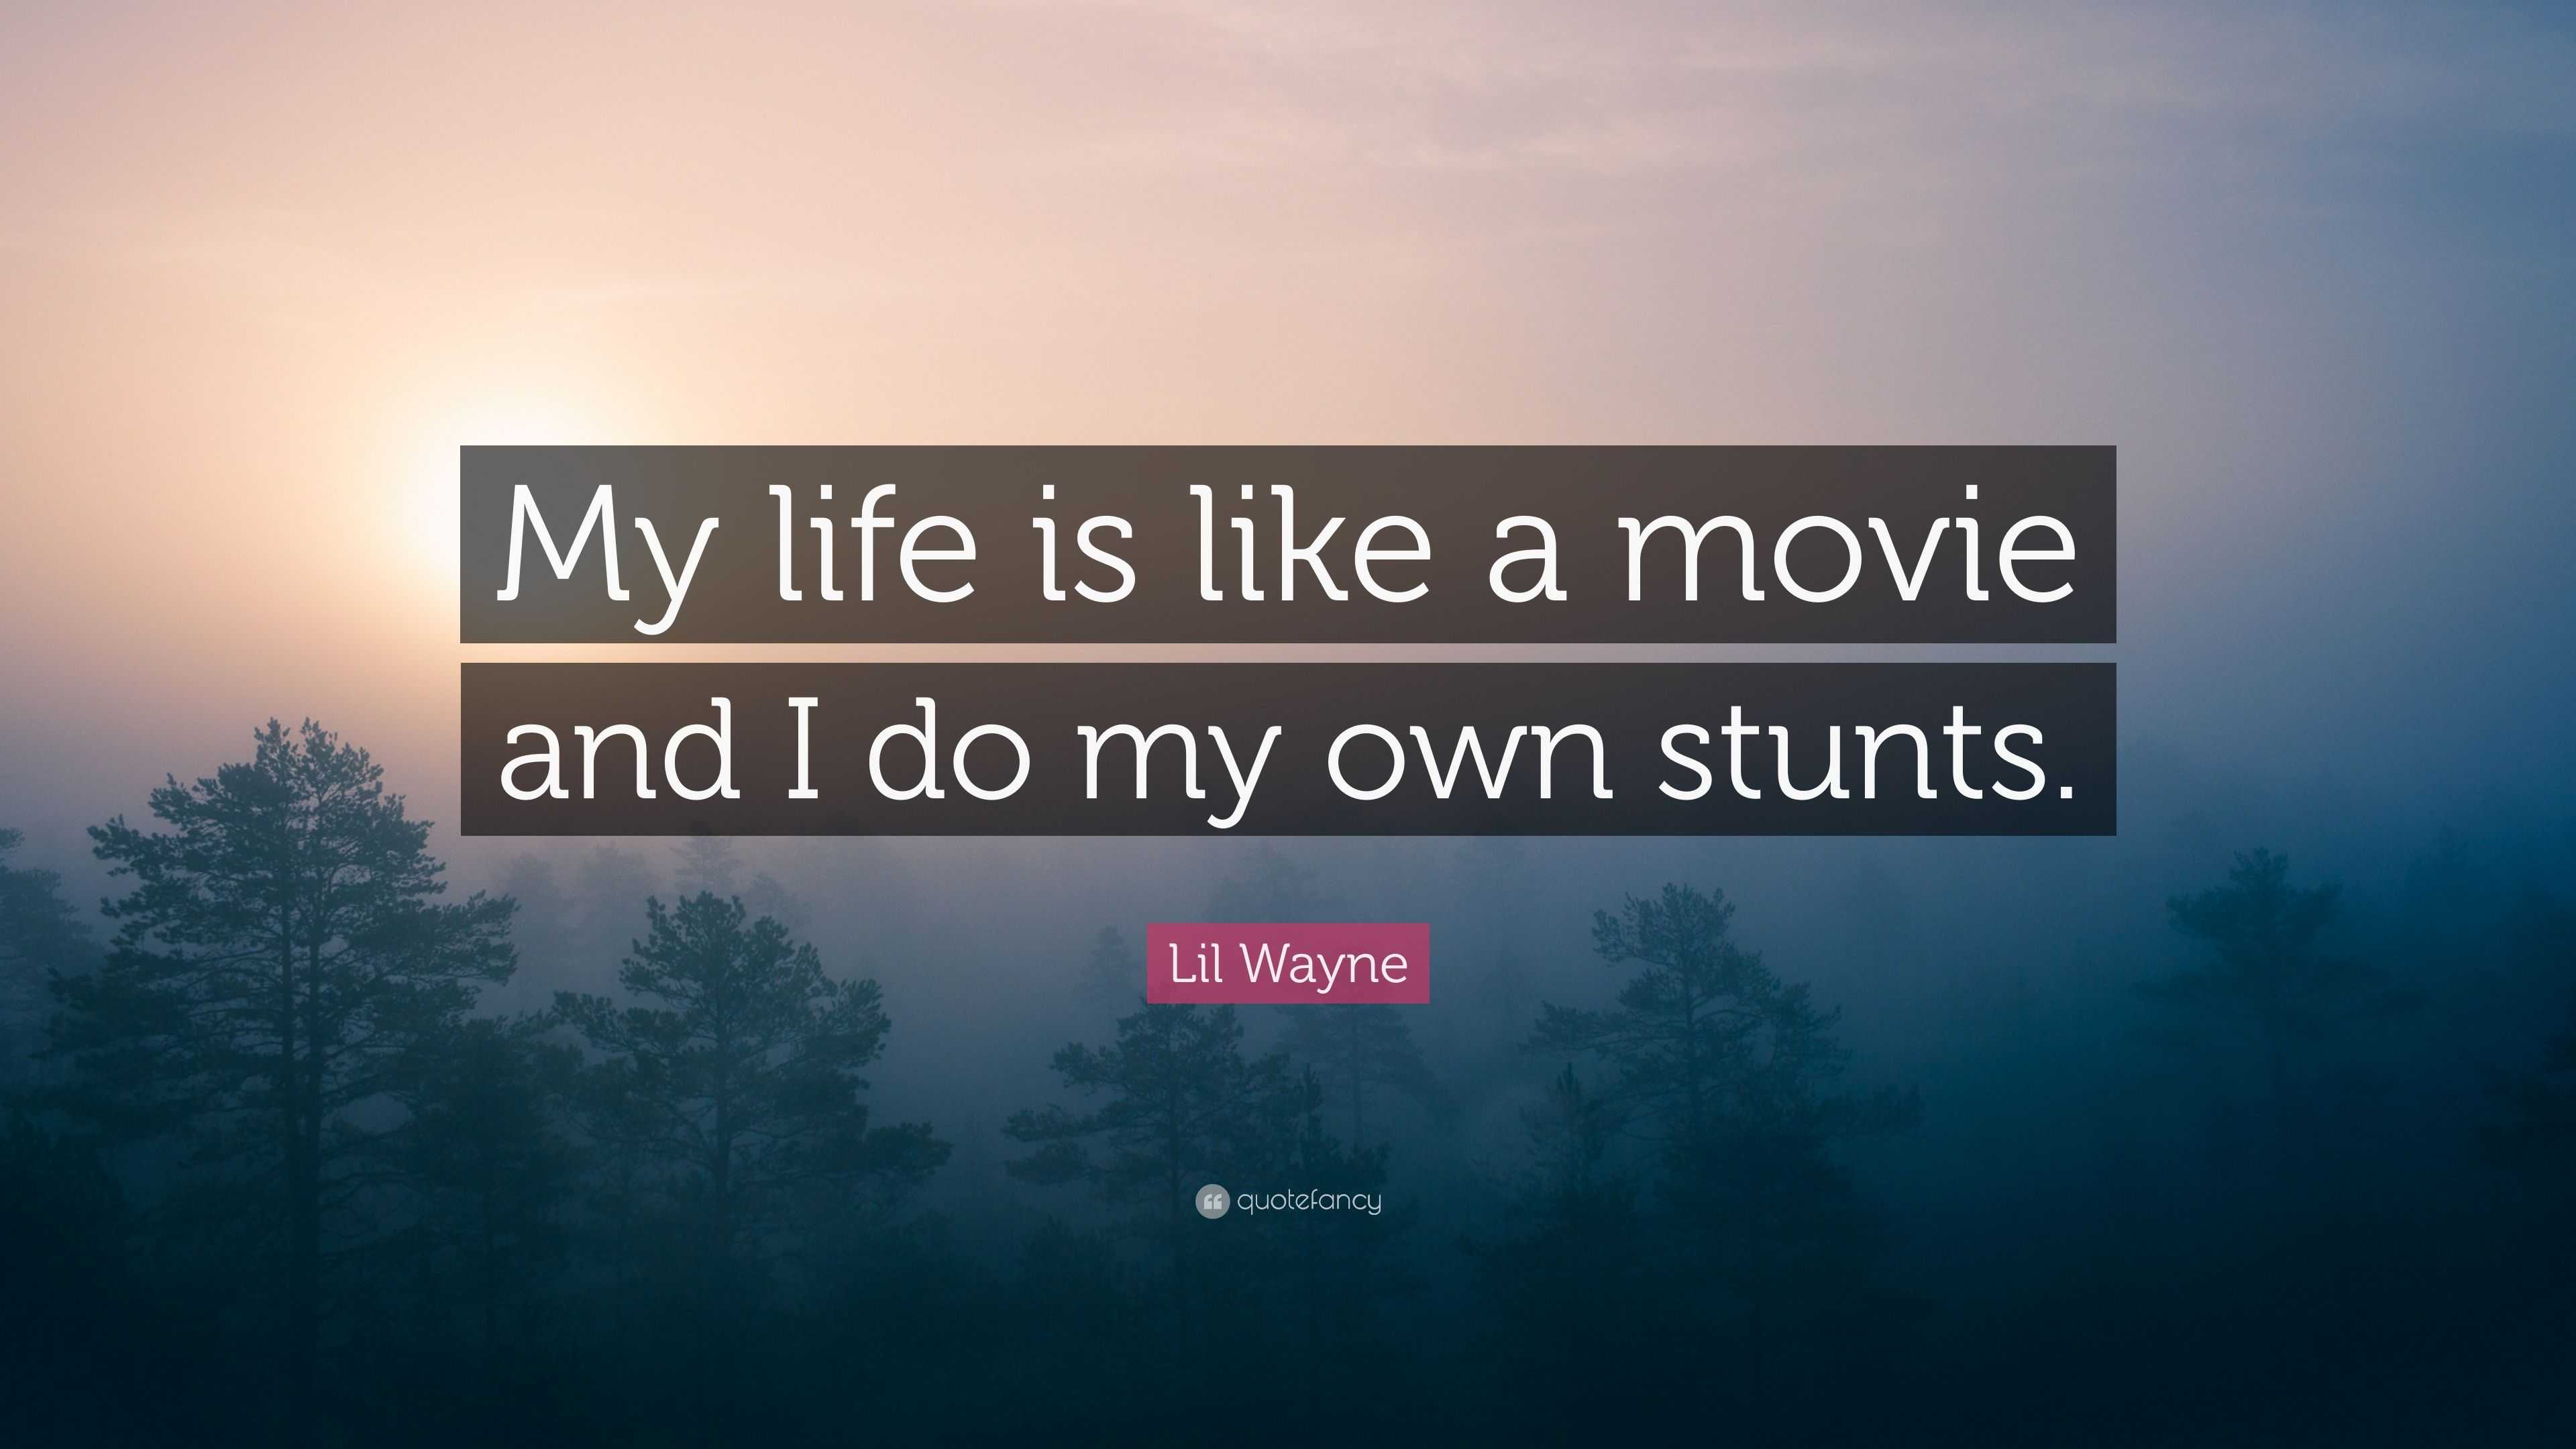 Lil Wayne Quote “My life is like a movie and I do my own